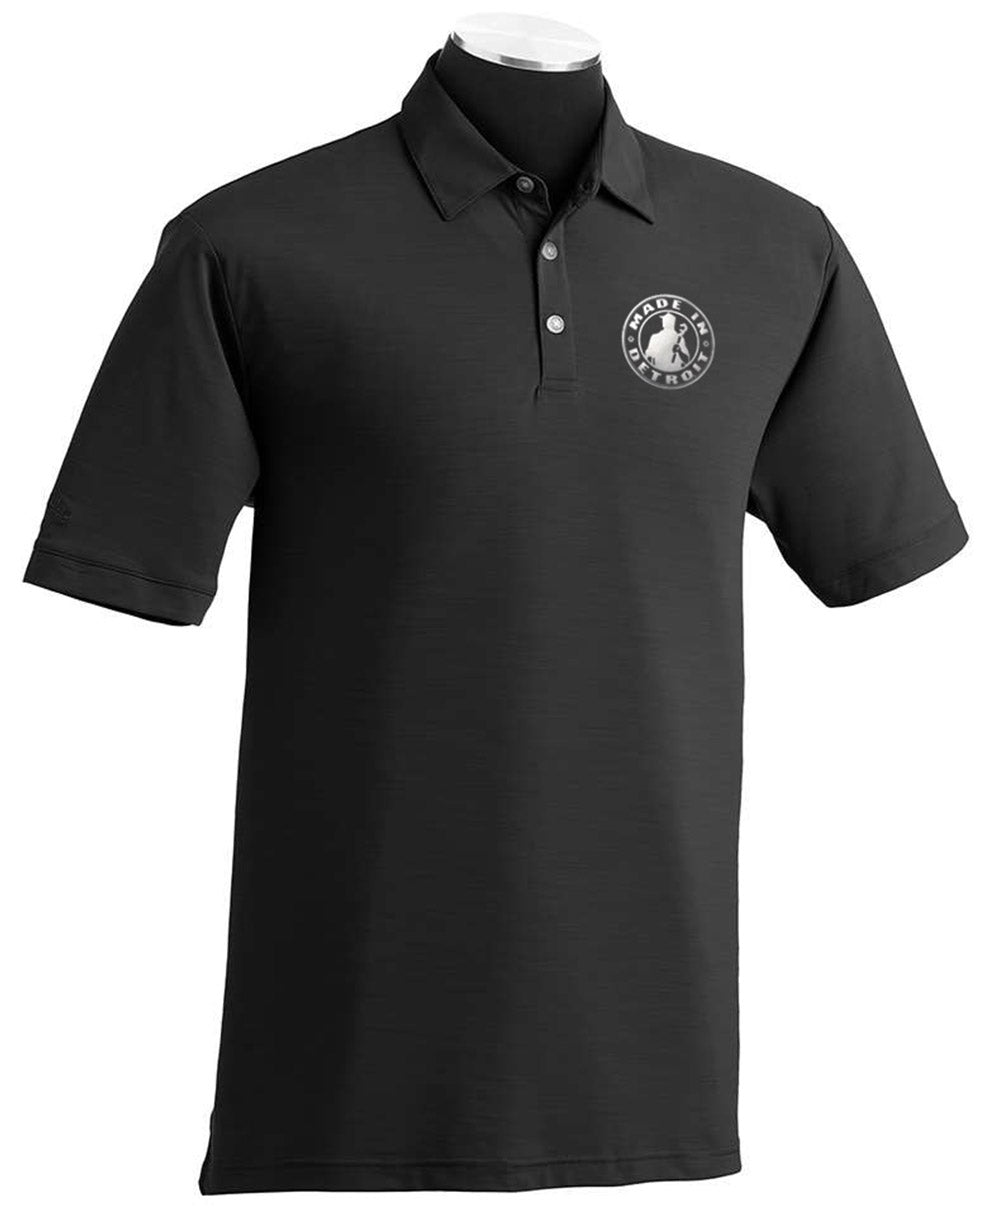 MID Premium Golf Polo – Made In Detroit